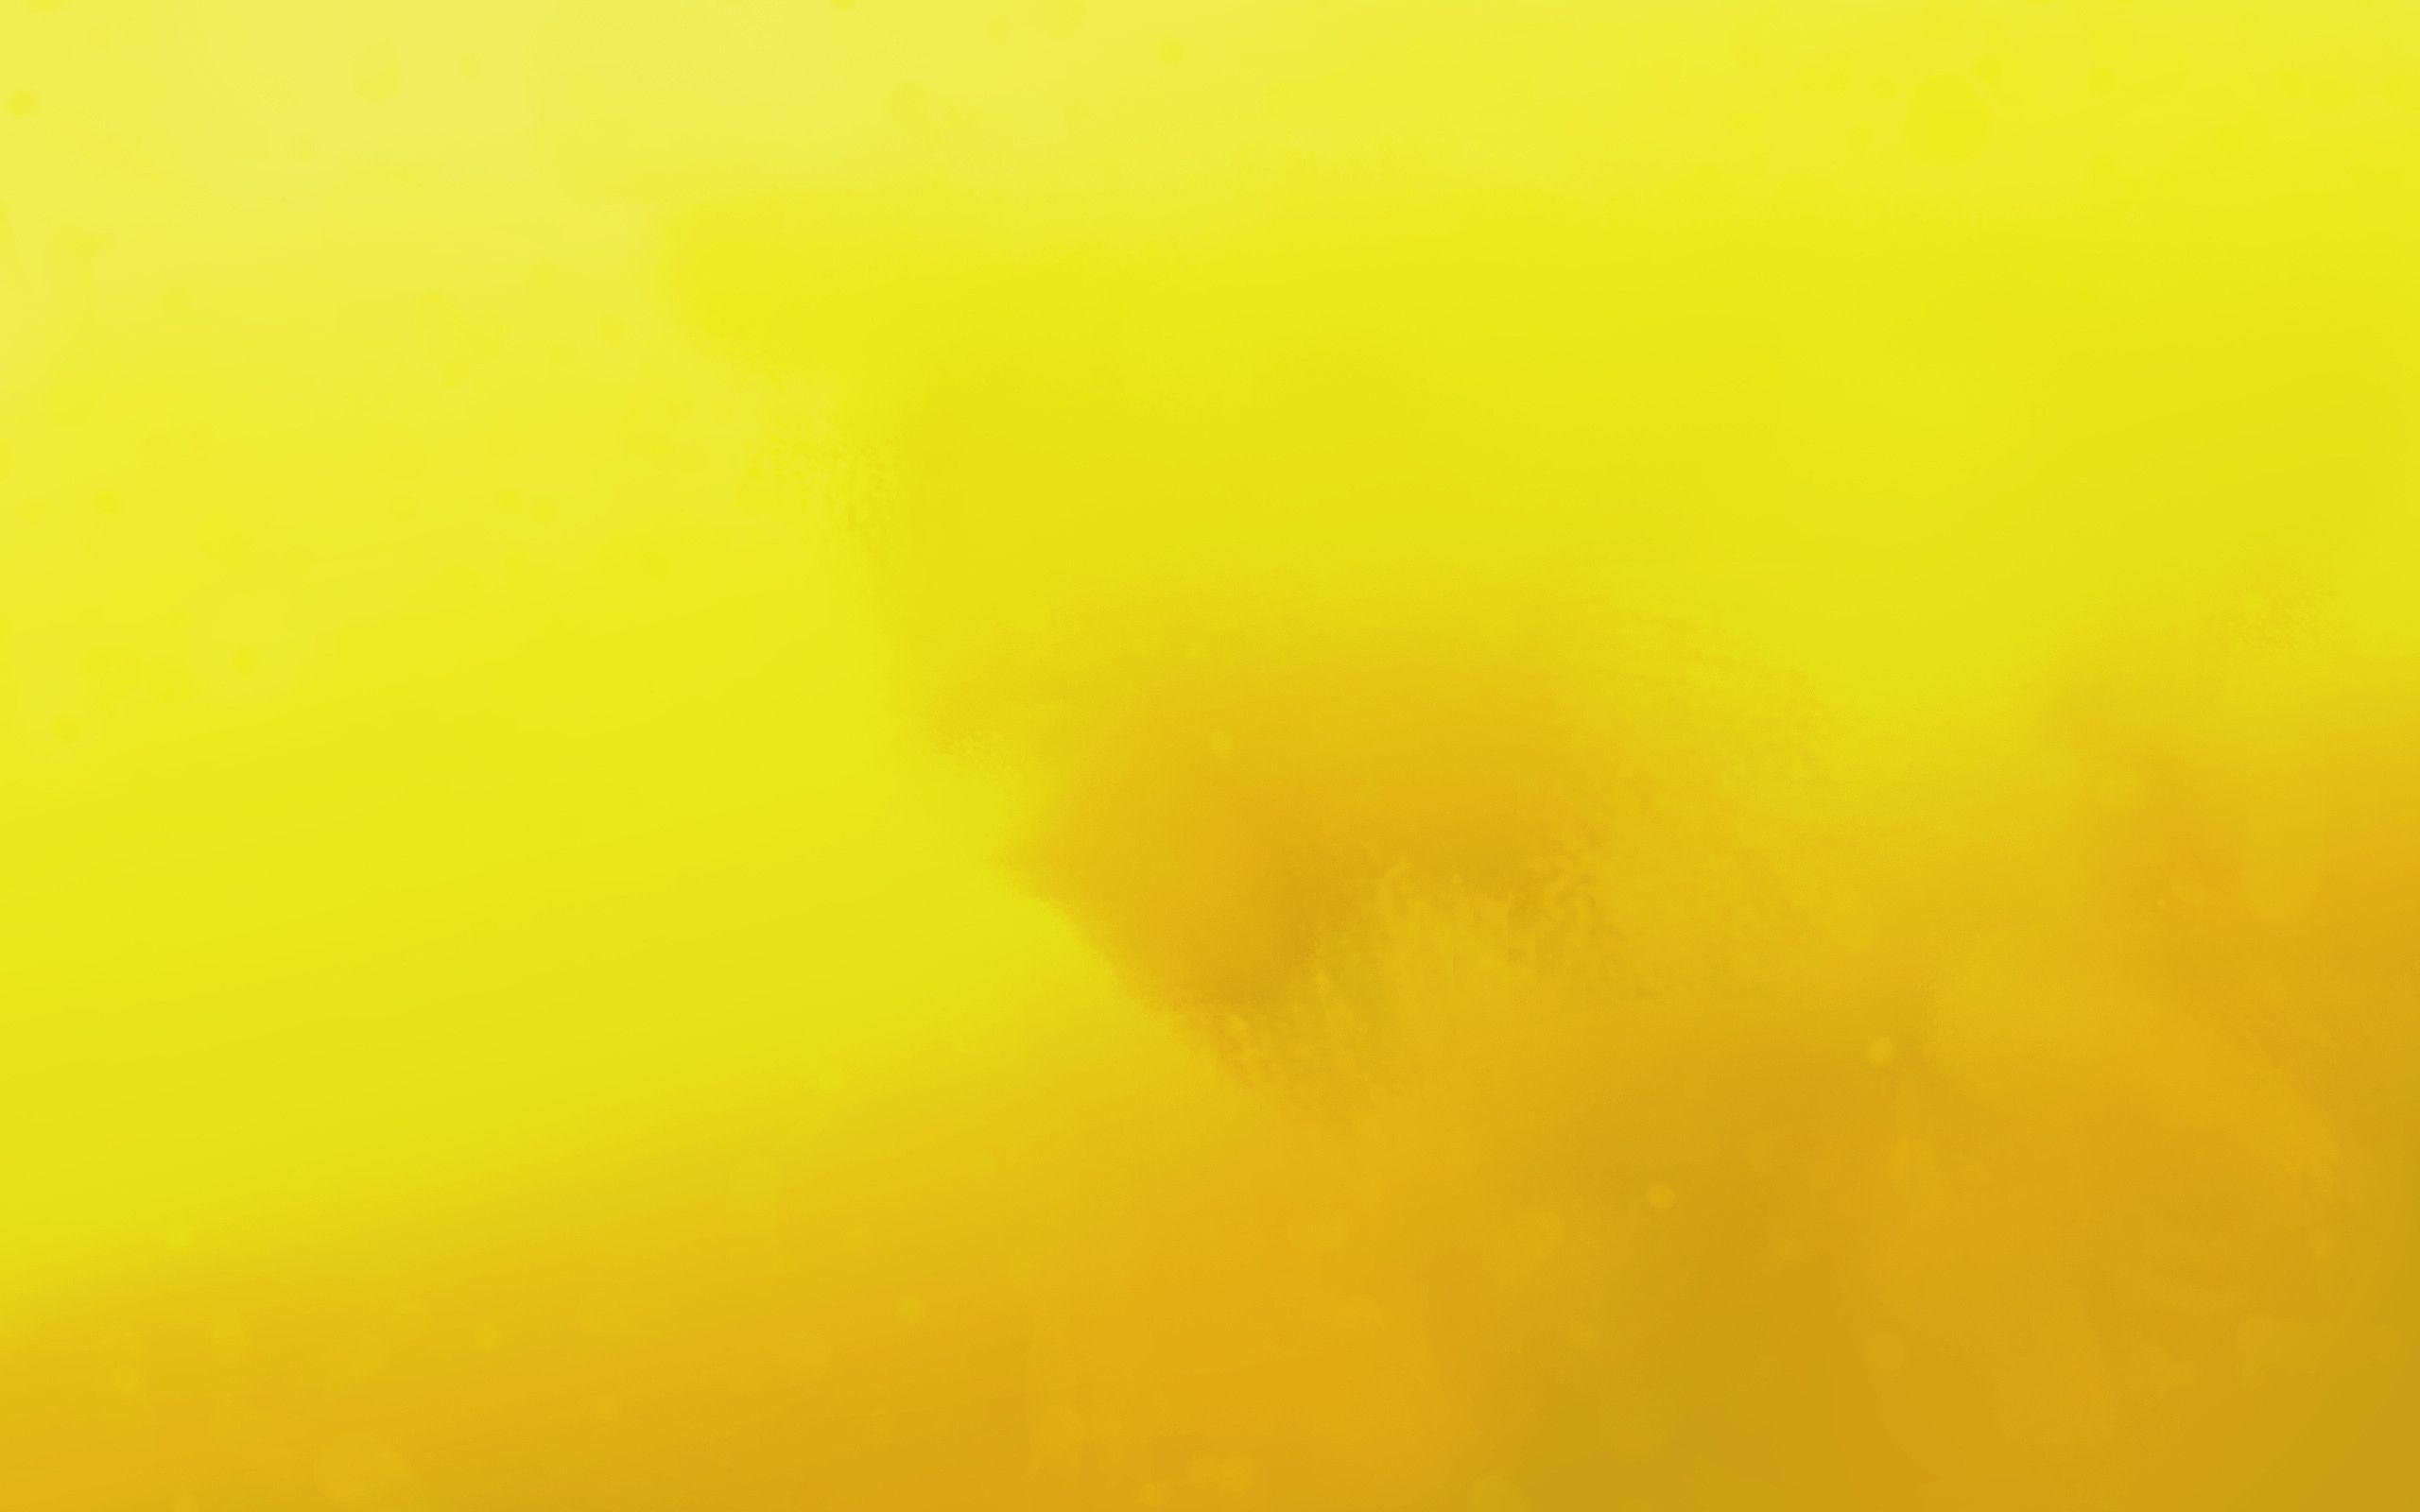 Download wallpaper for 1400x1050 resolution | Yellow Abstract HD | art and  paintings | Wallpaper Better